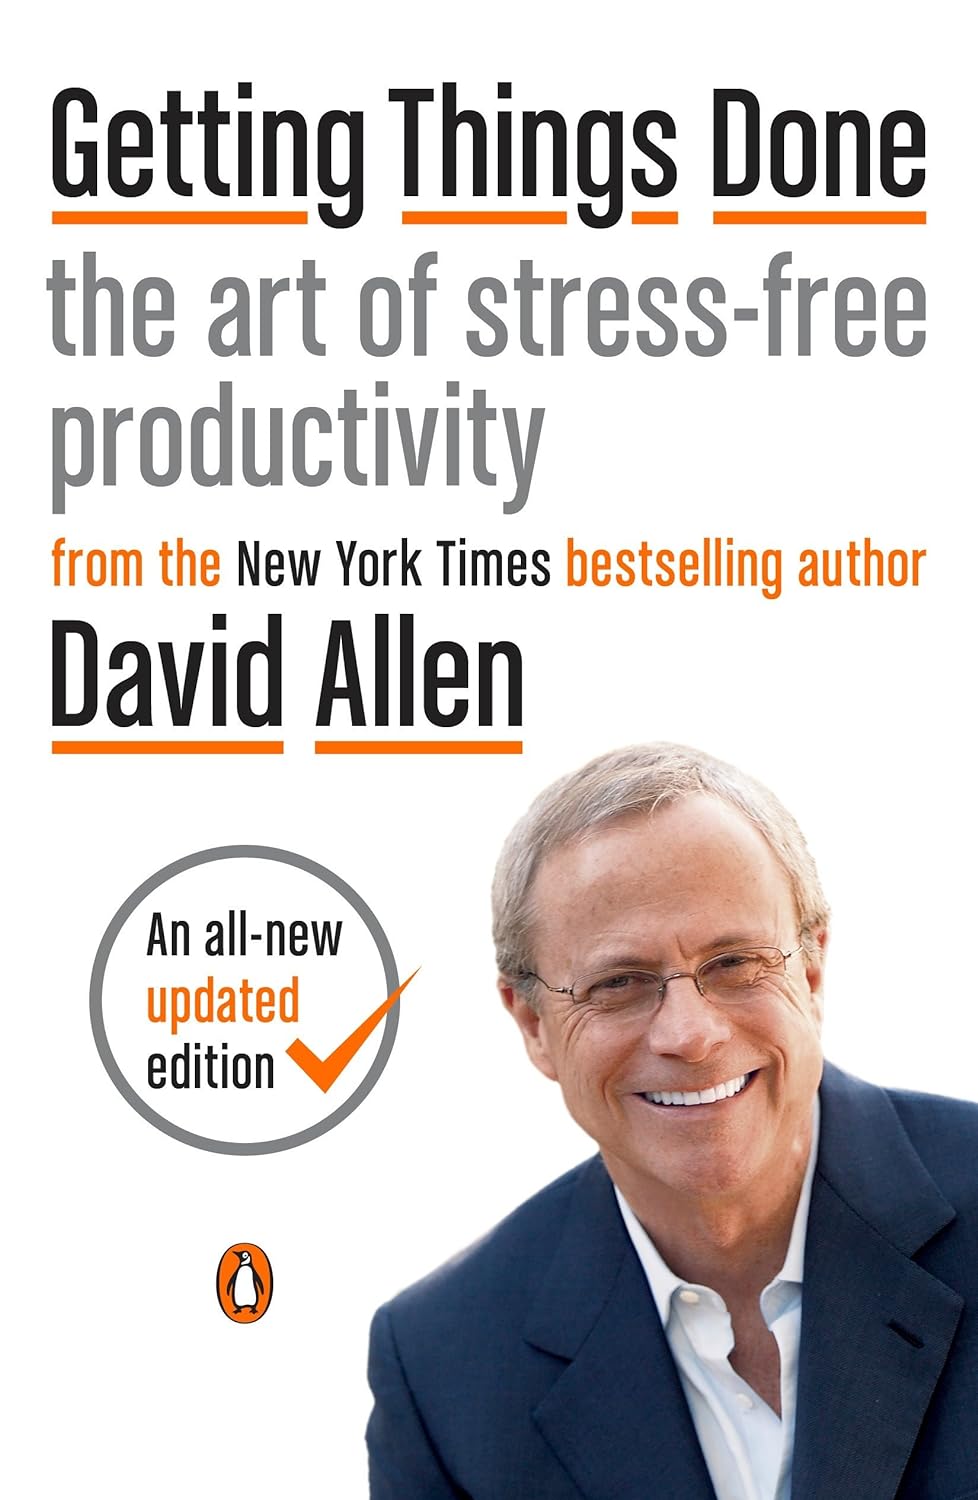 Libro: Getting Things Done (David Allen)